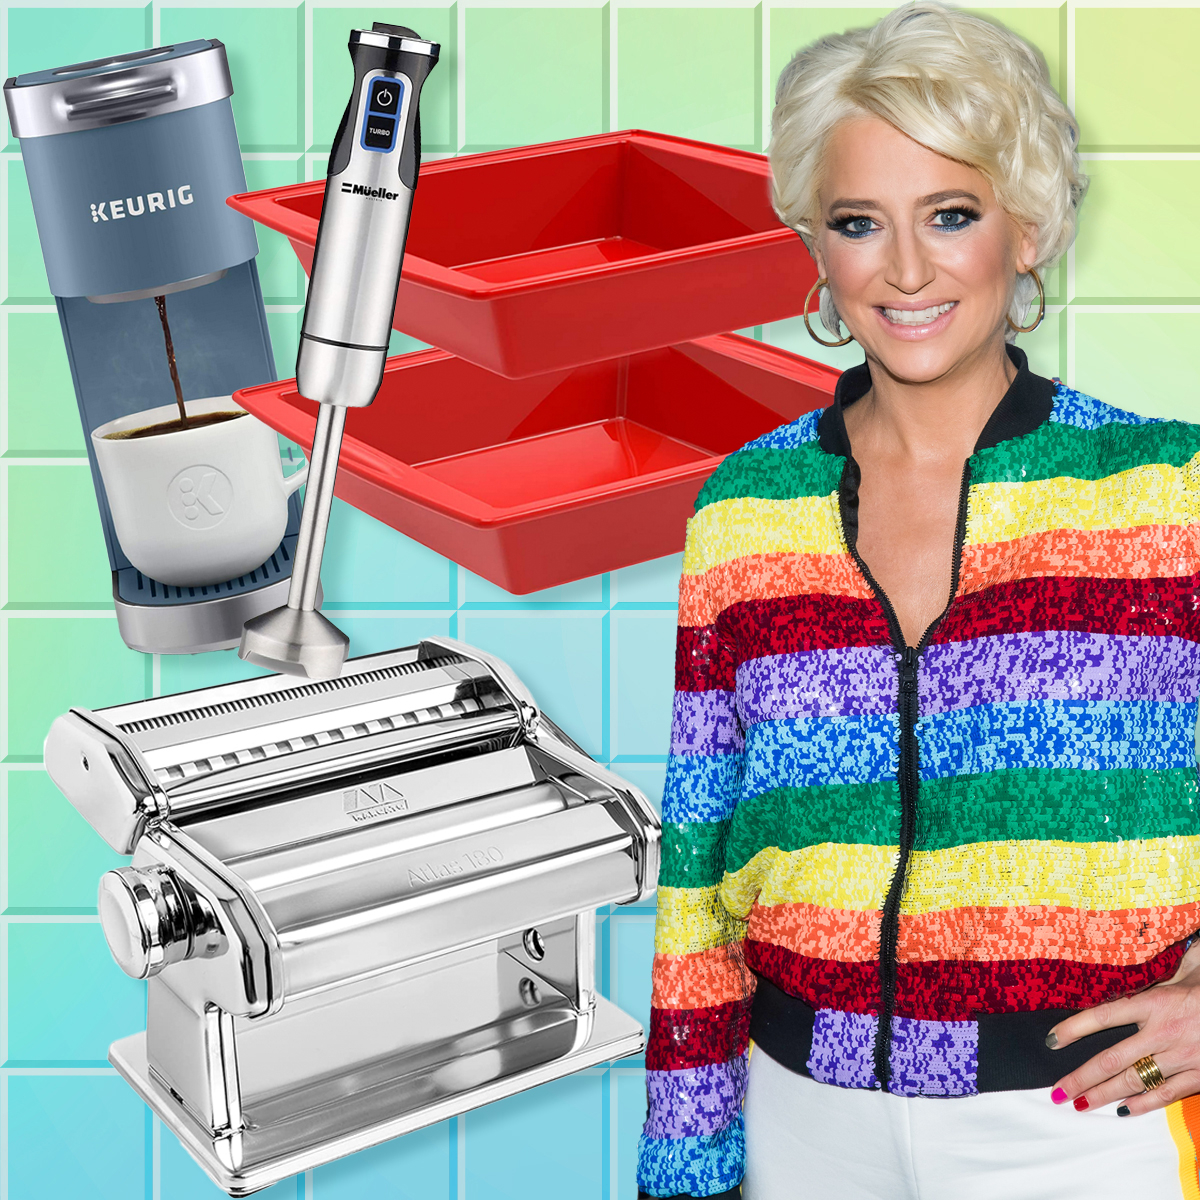 https://akns-images.eonline.com/eol_images/Entire_Site/202153/rs_1200x1200-210603115808-1200-dorinda-medley-in-her-kitchen.jpg?fit=around%7C1080:1080&output-quality=90&crop=1080:1080;center,top